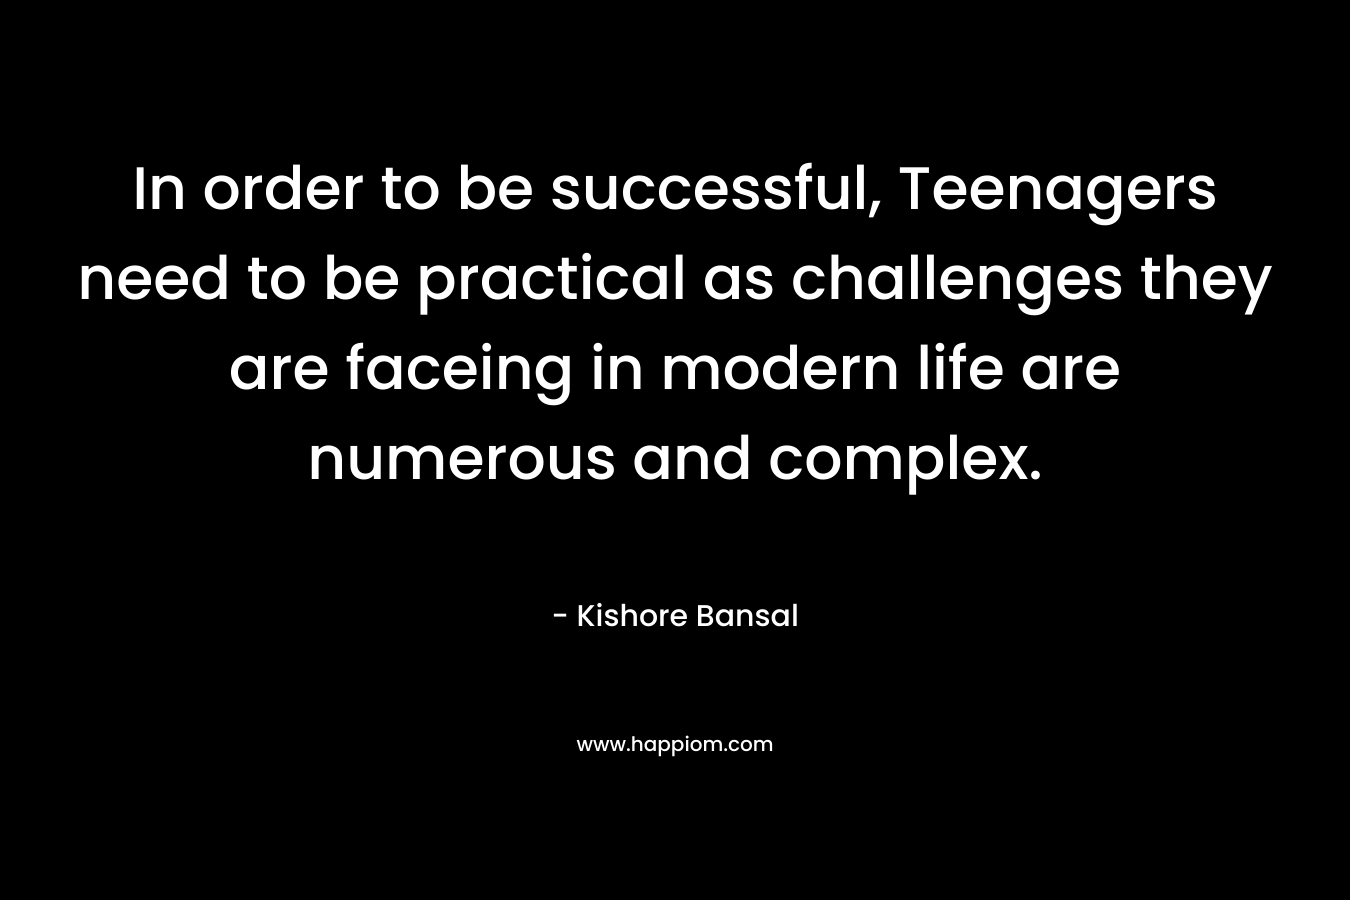 In order to be successful, Teenagers need to be practical as challenges they are faceing in modern life are numerous and complex.